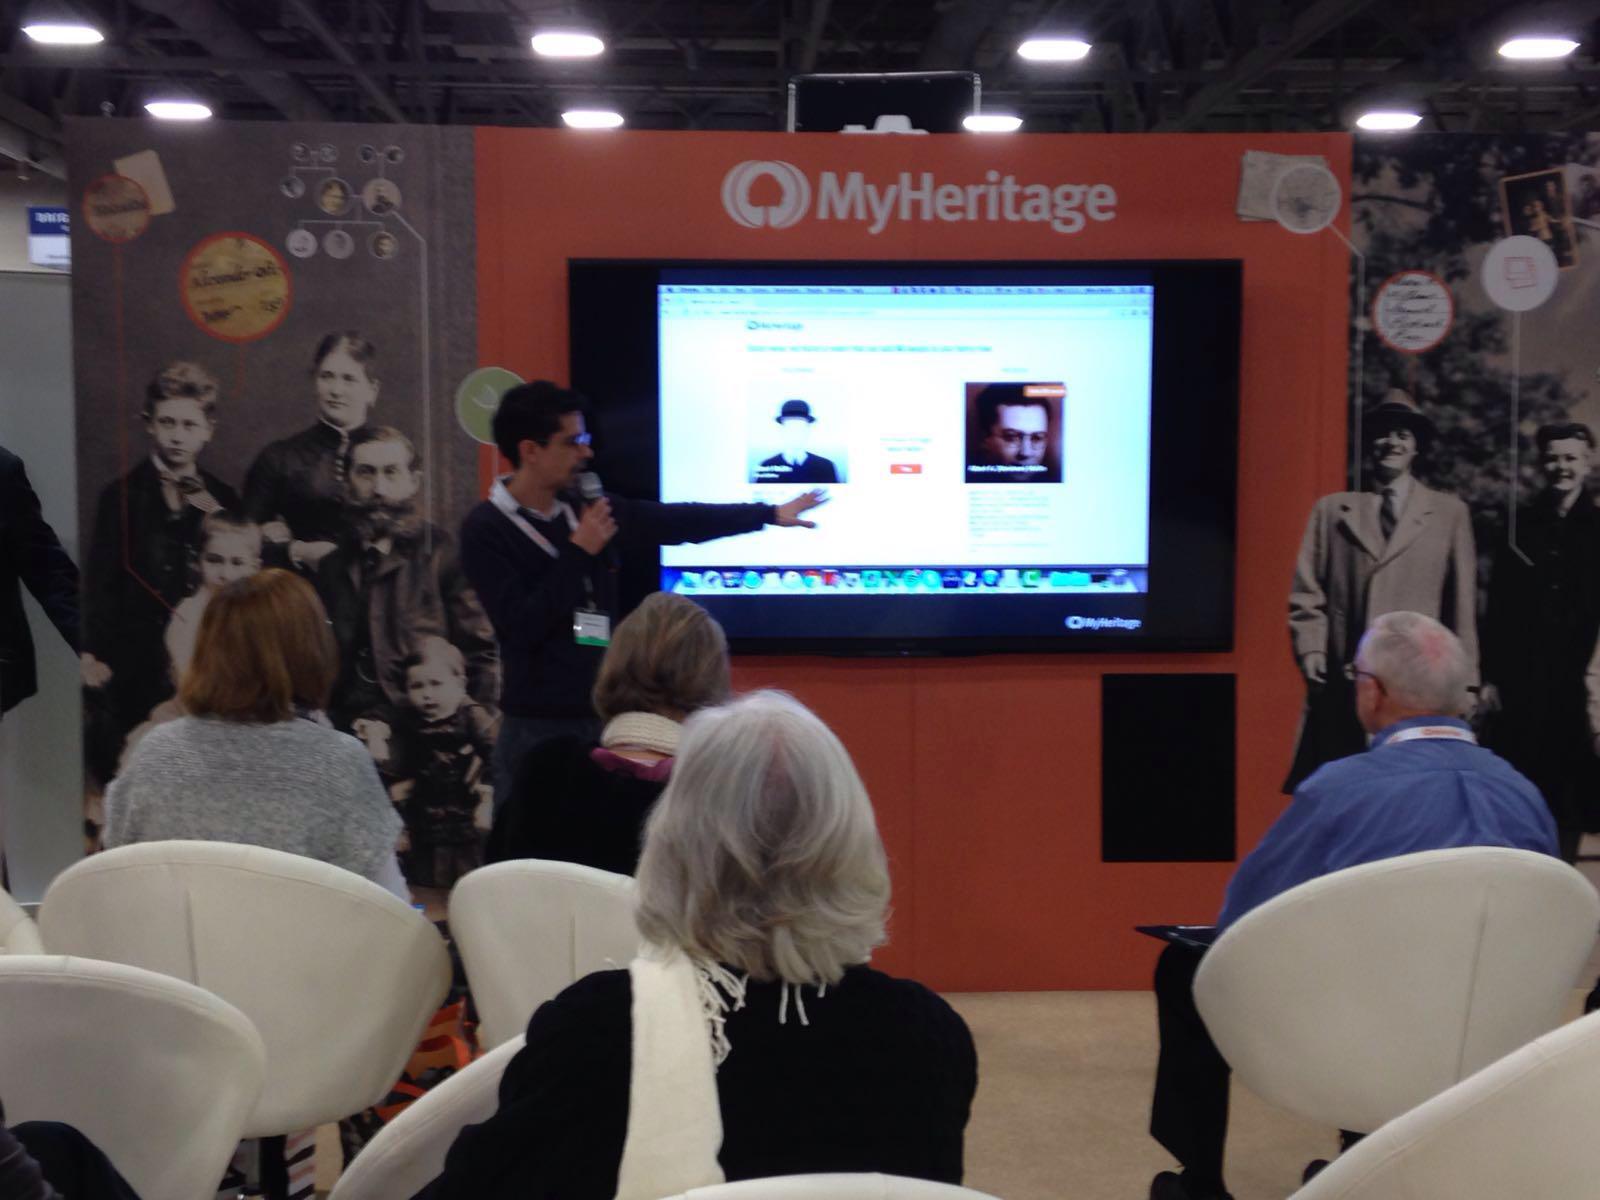 Noam Kovacs kicking off our MyHeritage sessions with Instant Discoveries™.